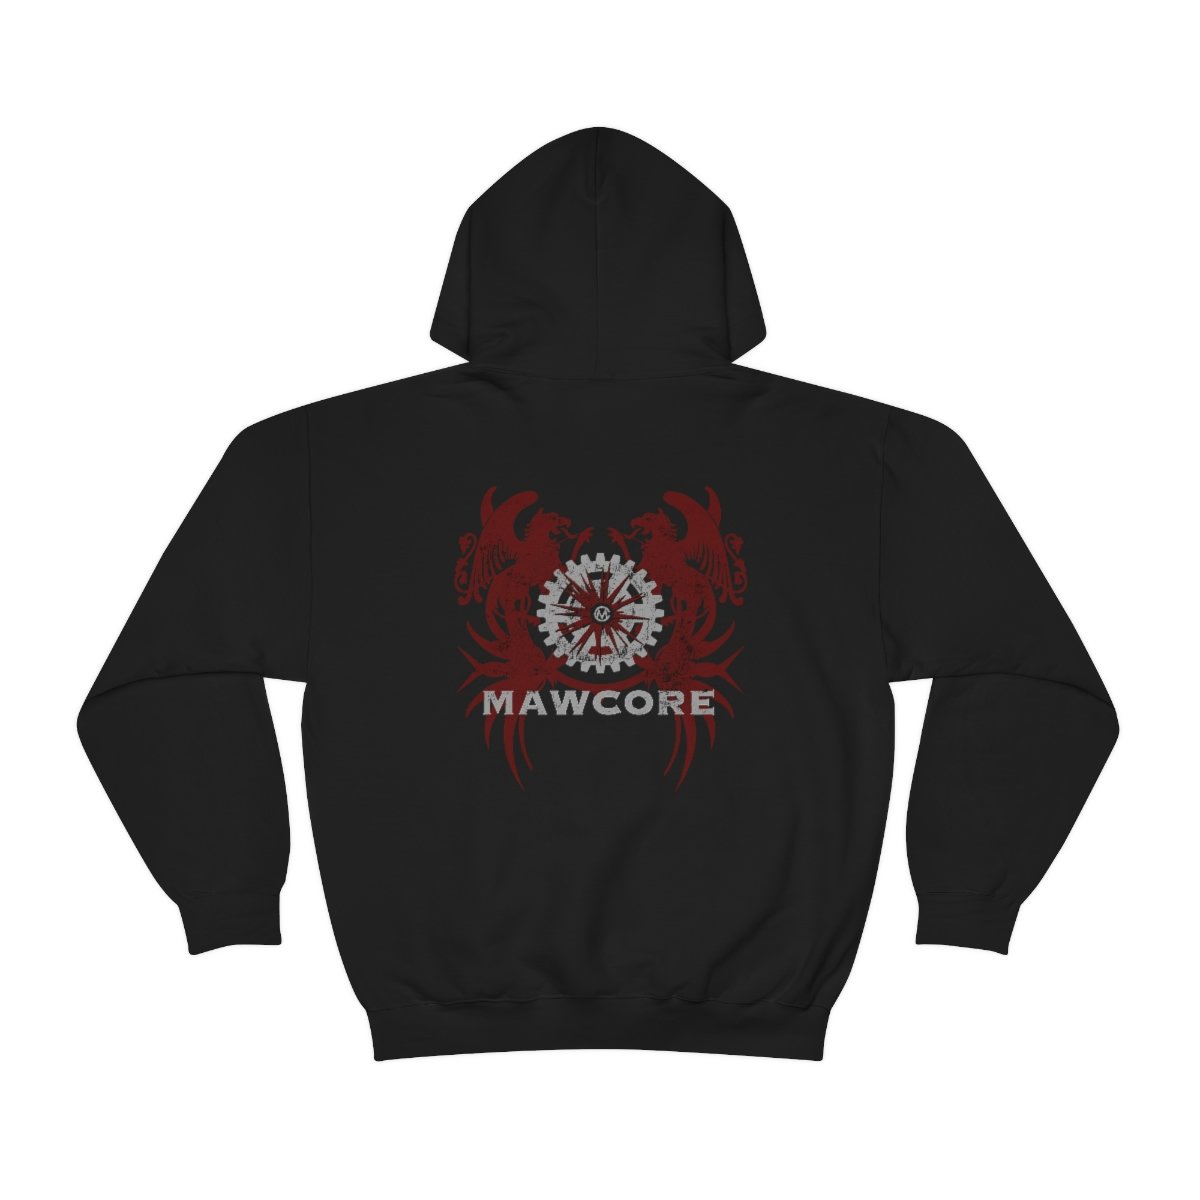 Mawcore Crest Hooded Pullover Sweatshirt